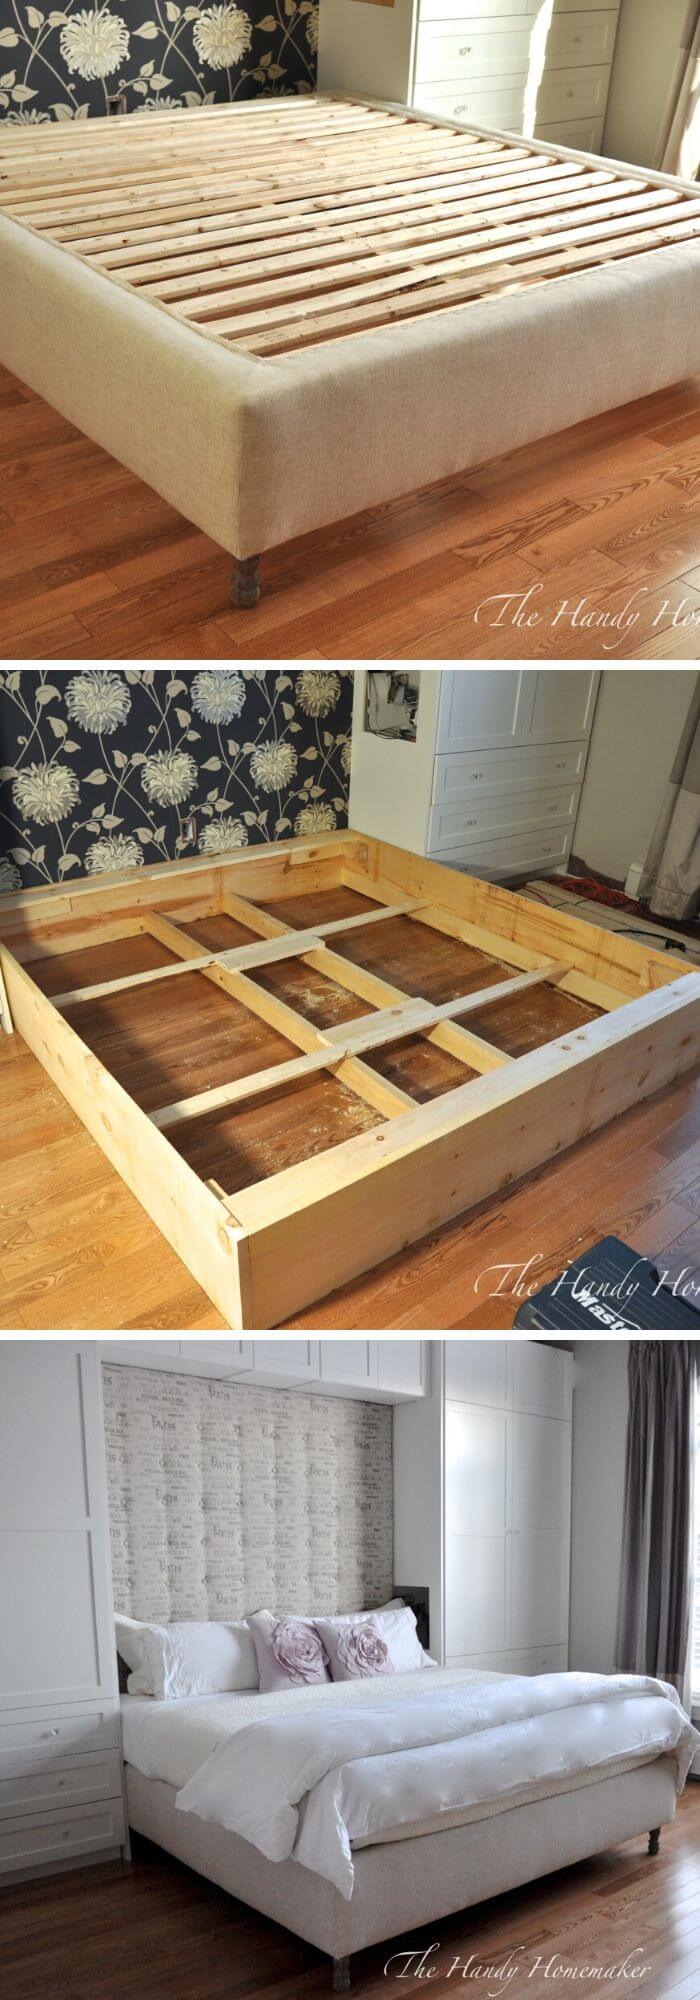 23 Clever Diy Bed Frame Ideas And, How To Build A Queen Size Bed Frame Out Of Wood